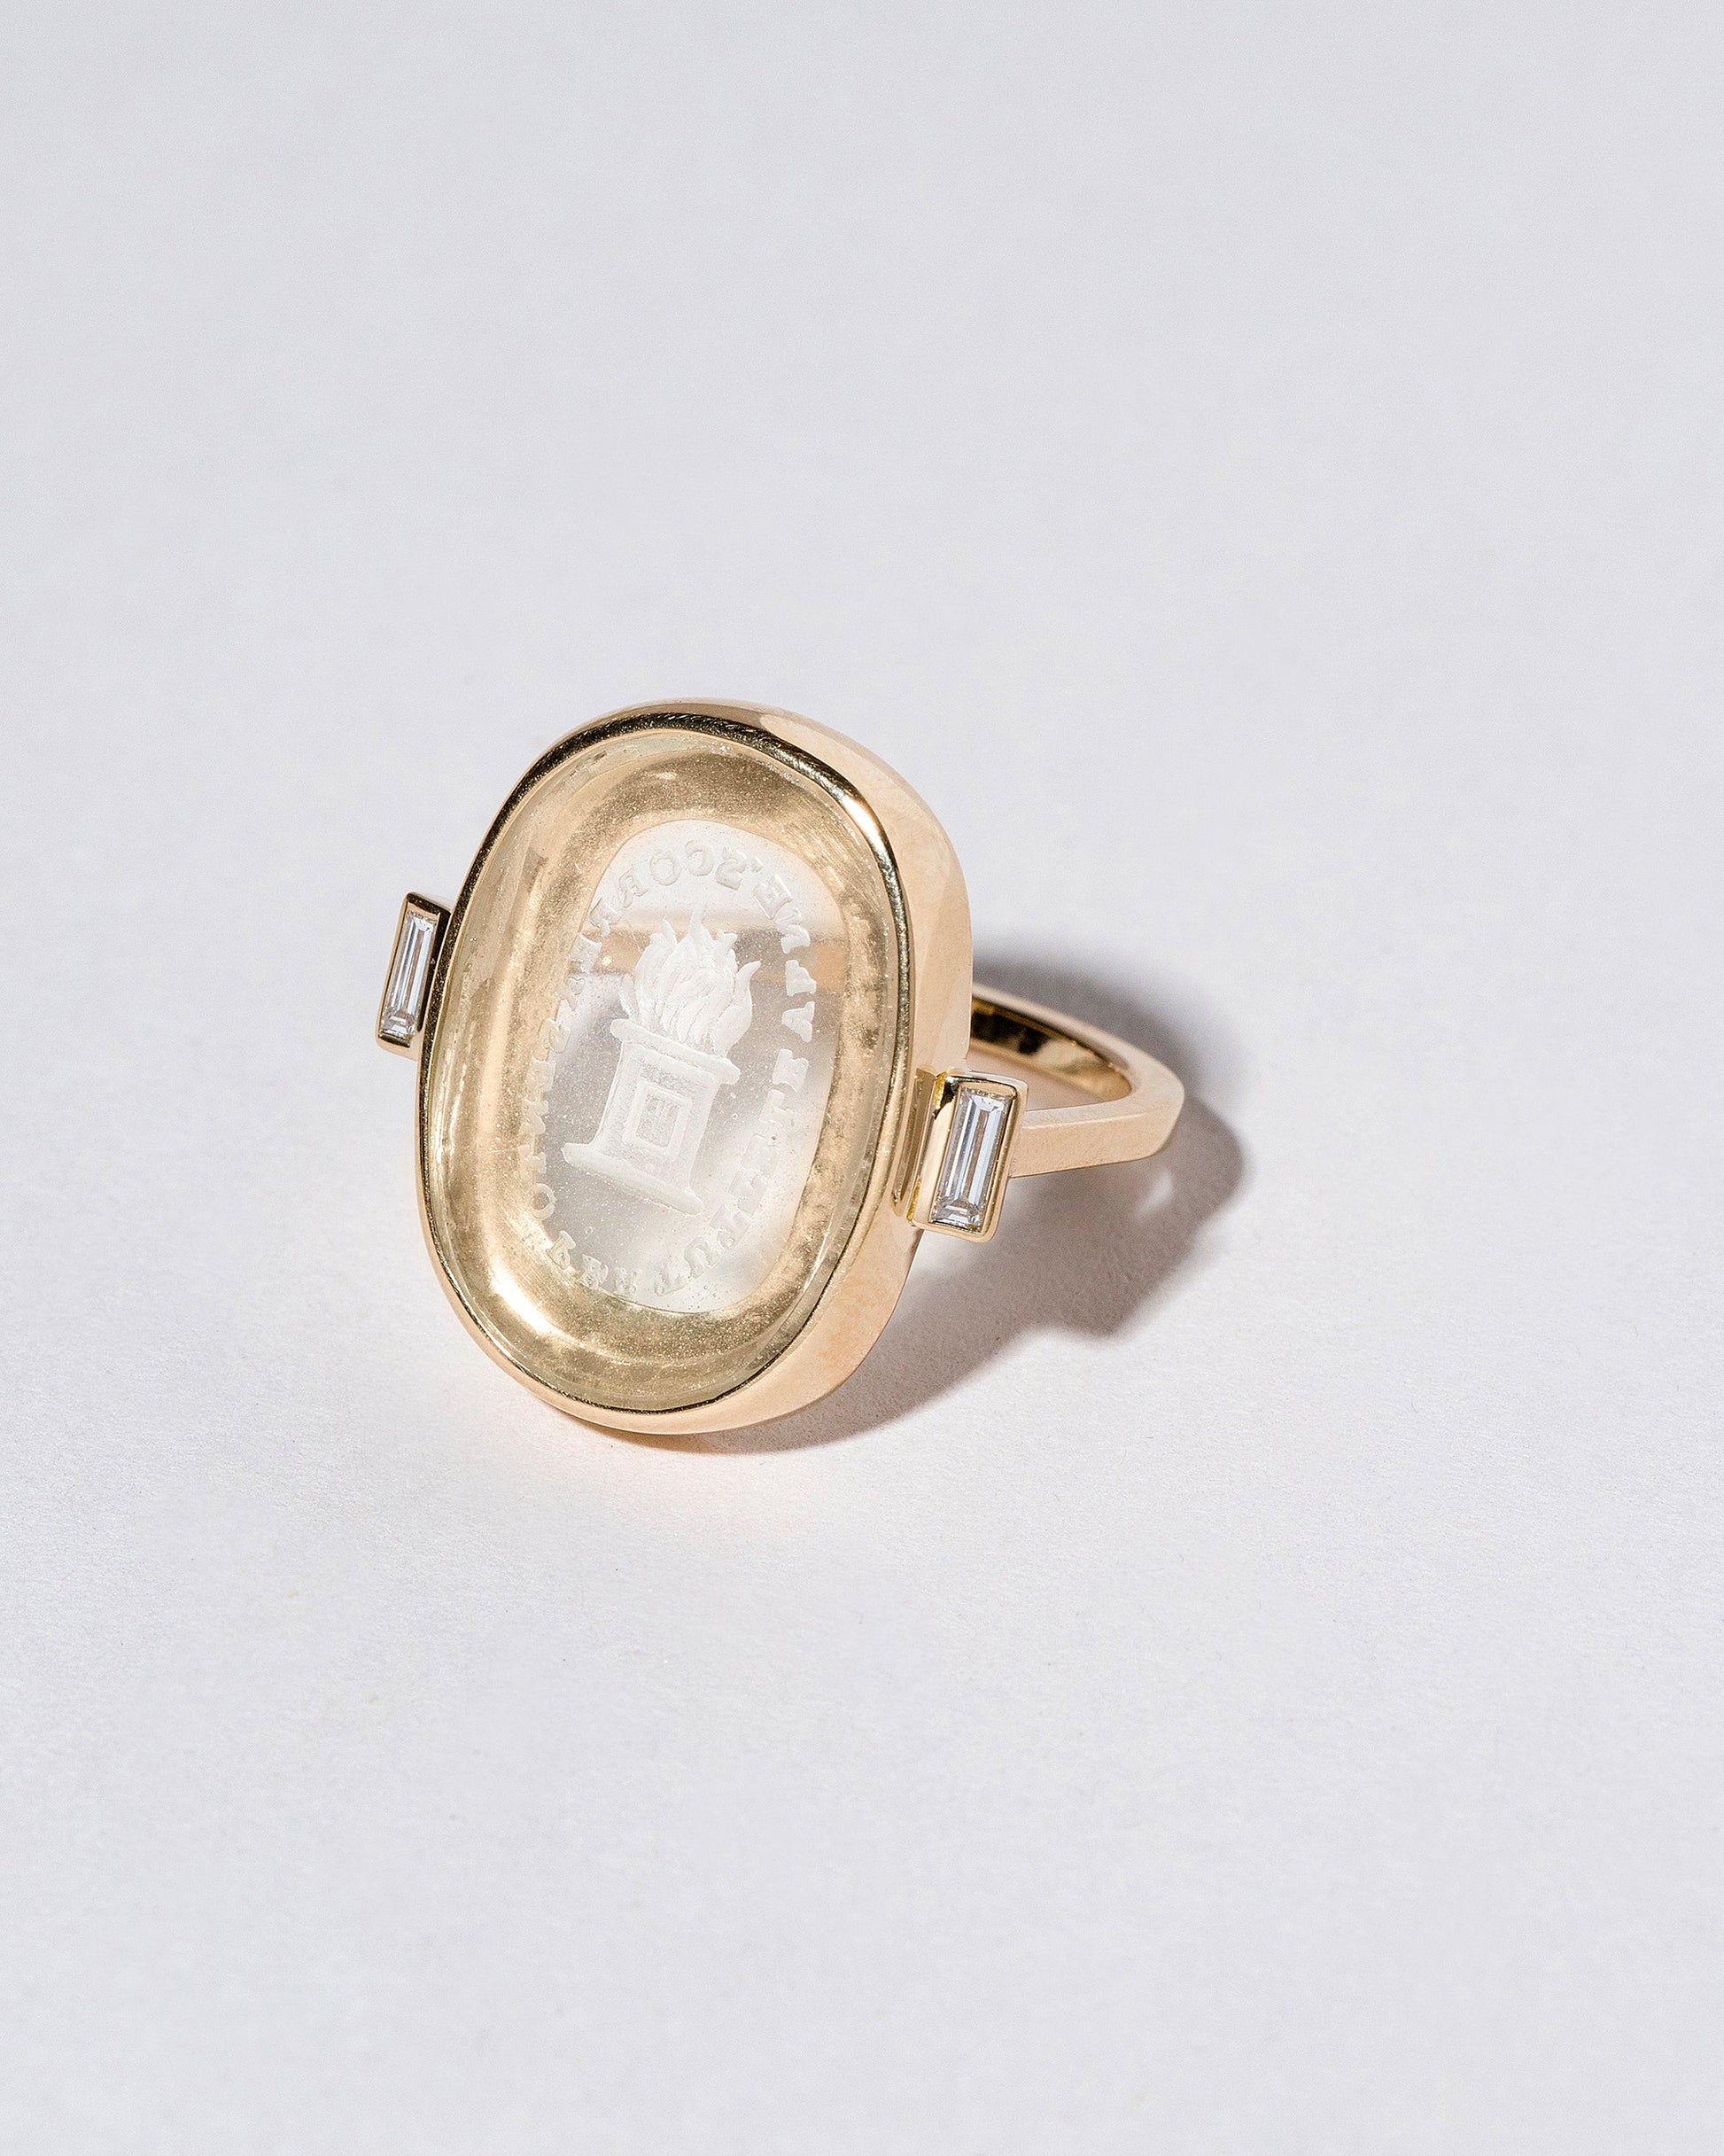  Passion Intaglio Seal Ring on light color background.